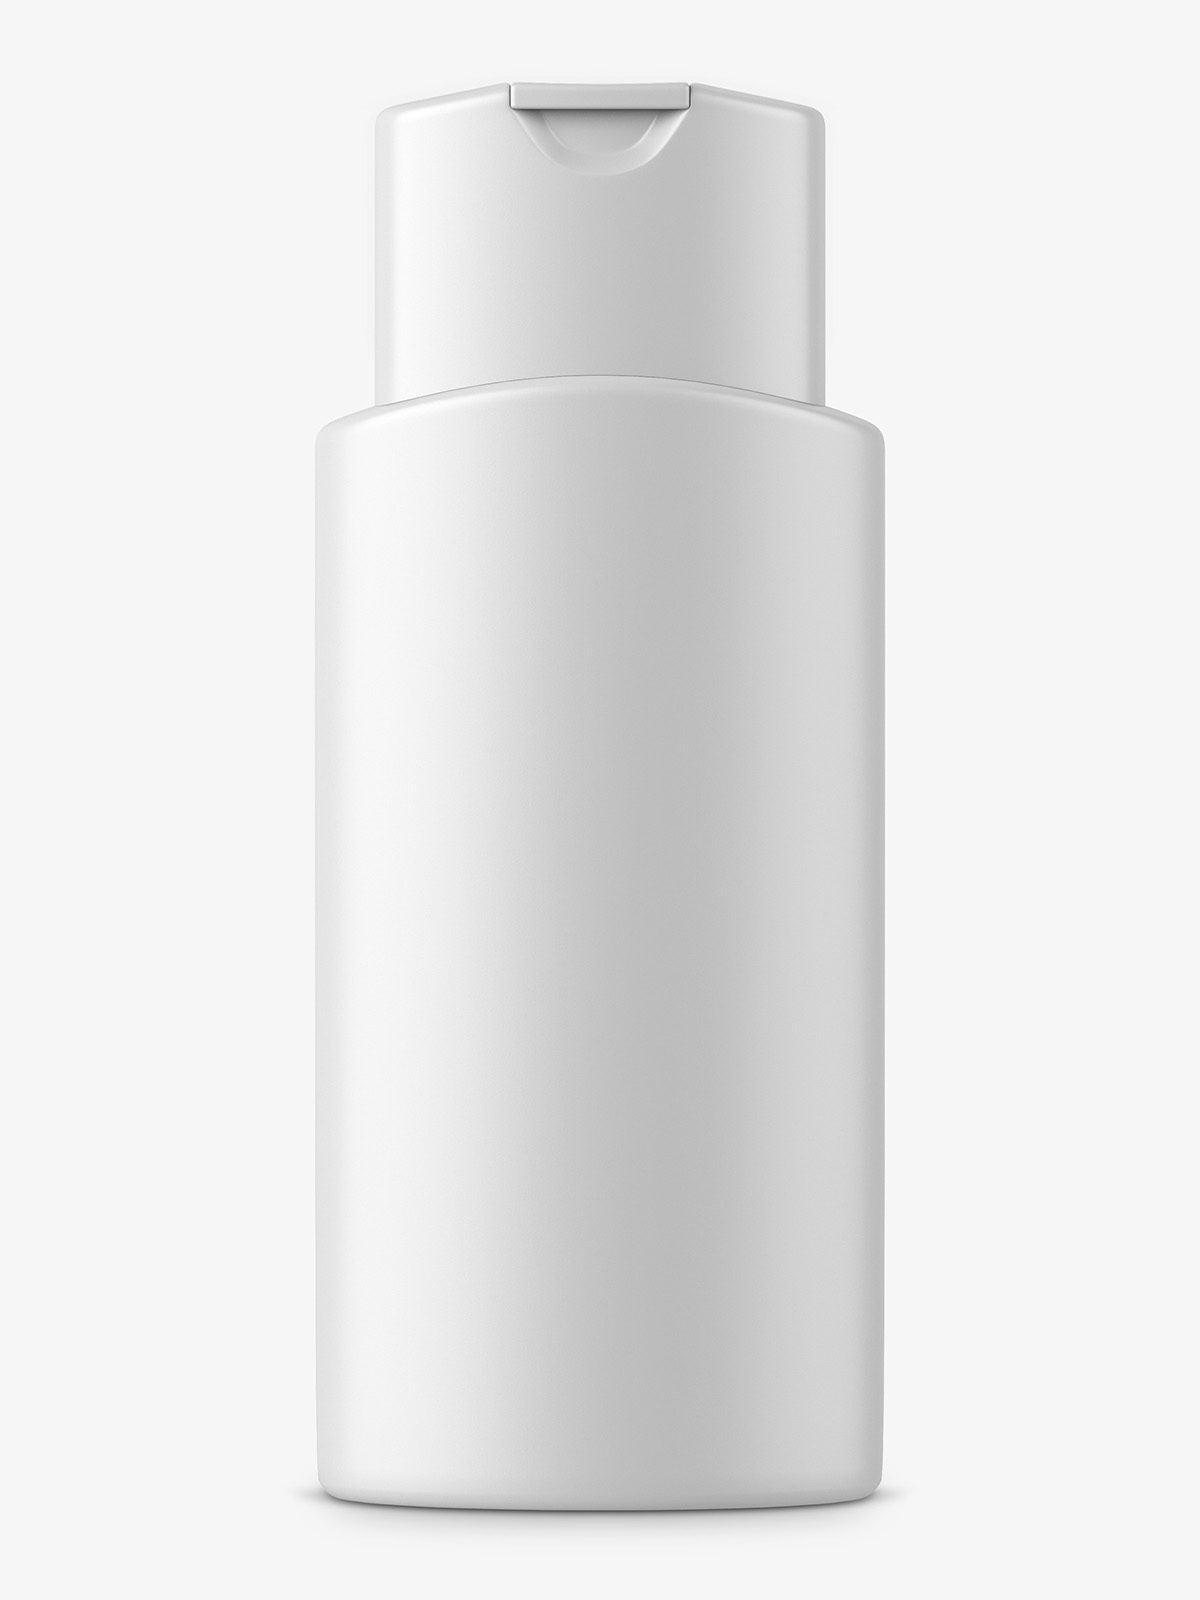 Download Shampoo bottle with snap-on cap - Smarty Mockups